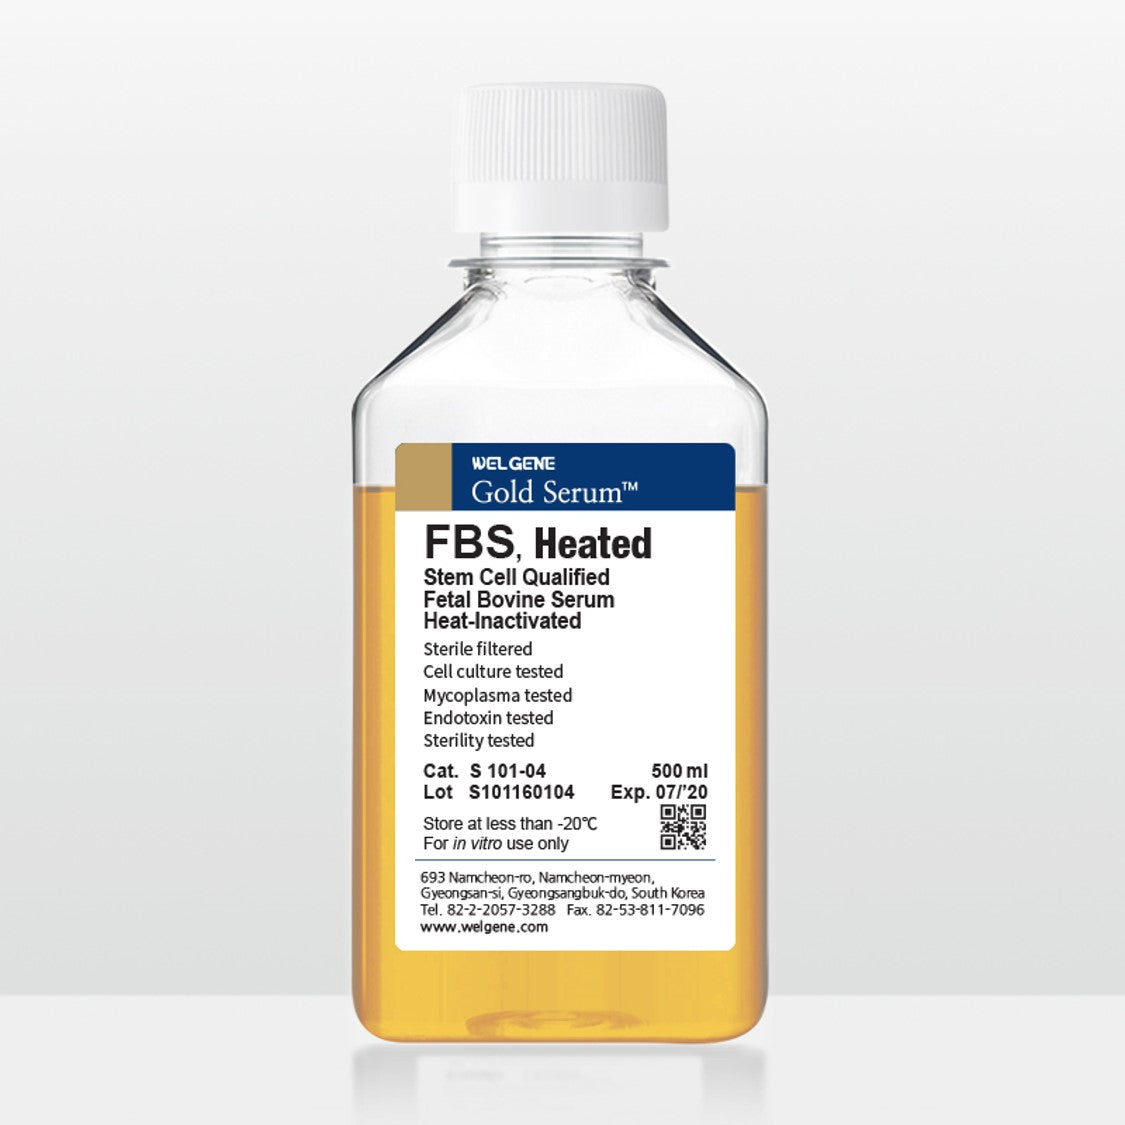 FBS Stem Cell-Qualified Heat-Inactivated (S101-04)